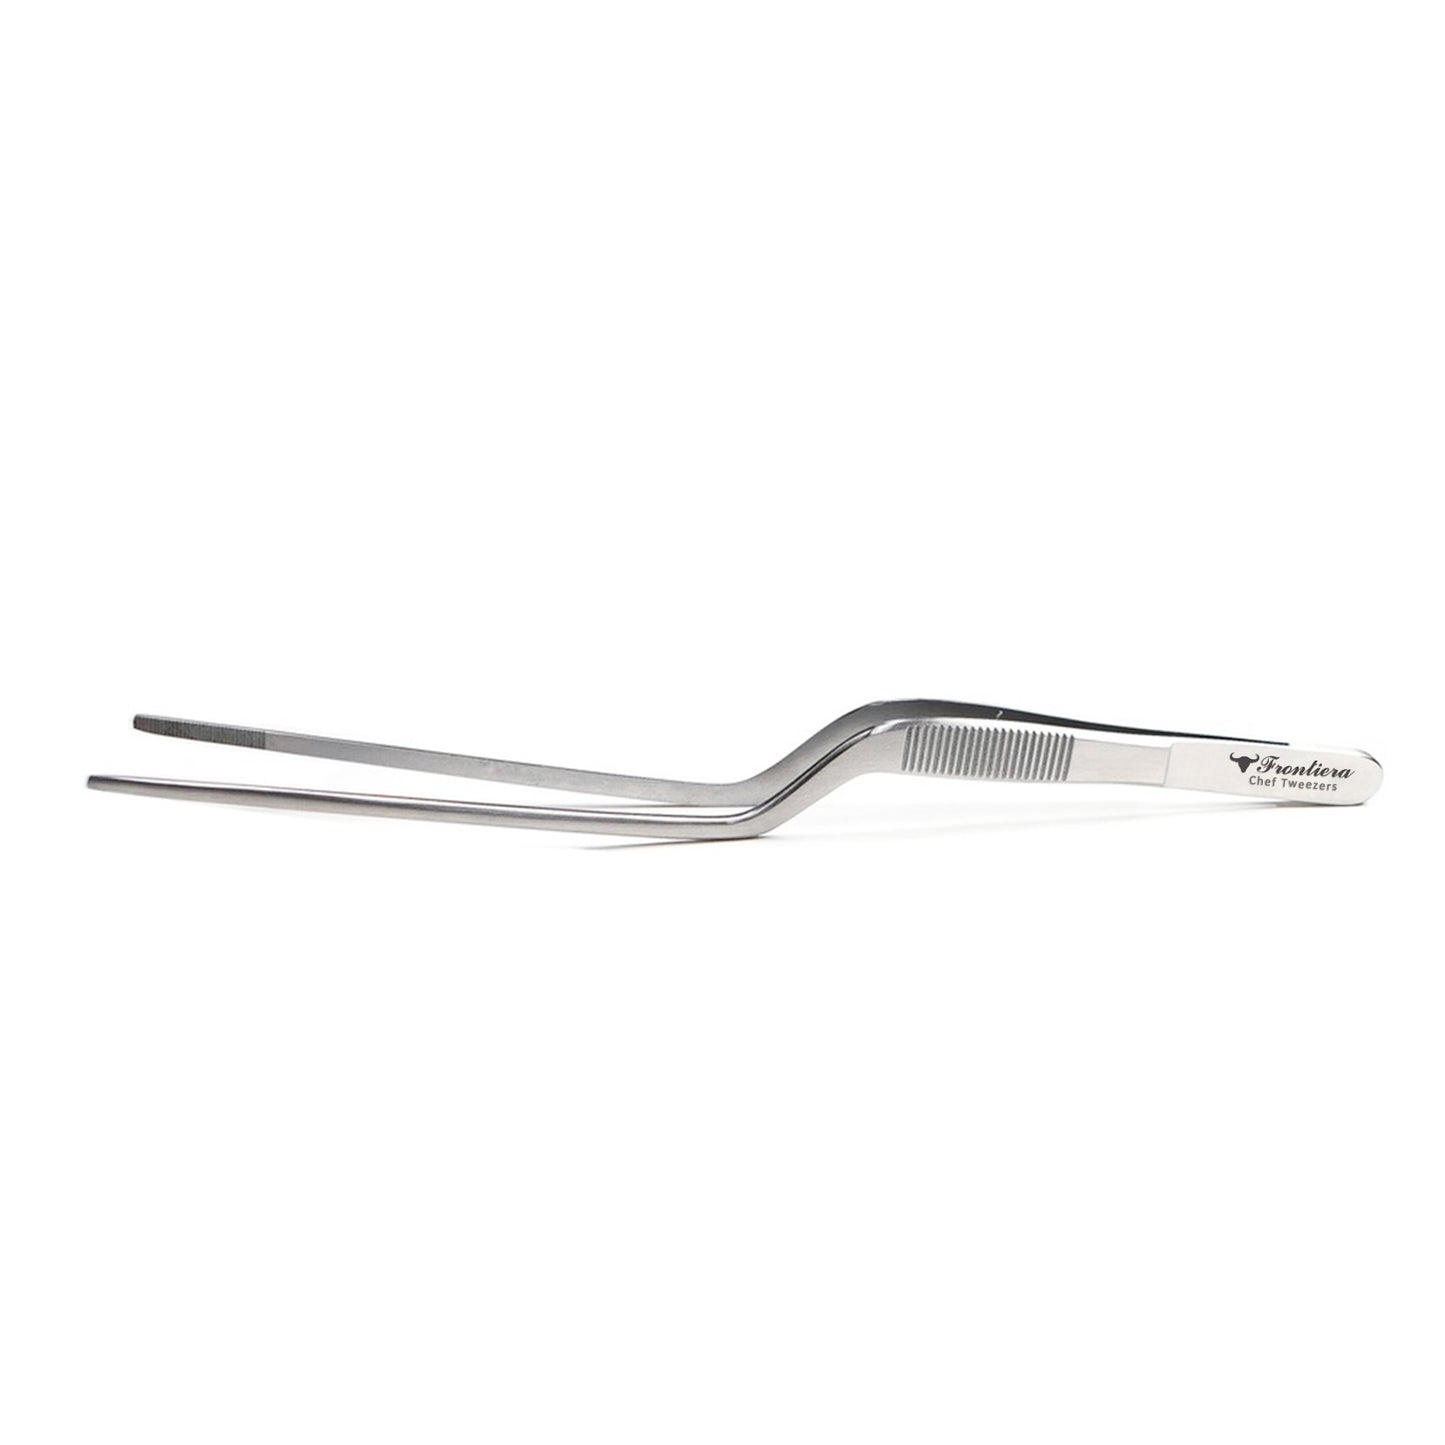 High Precision Offset Chef's Tweezers (20cm/7.87") GREY + Custome Engraving (Optional)